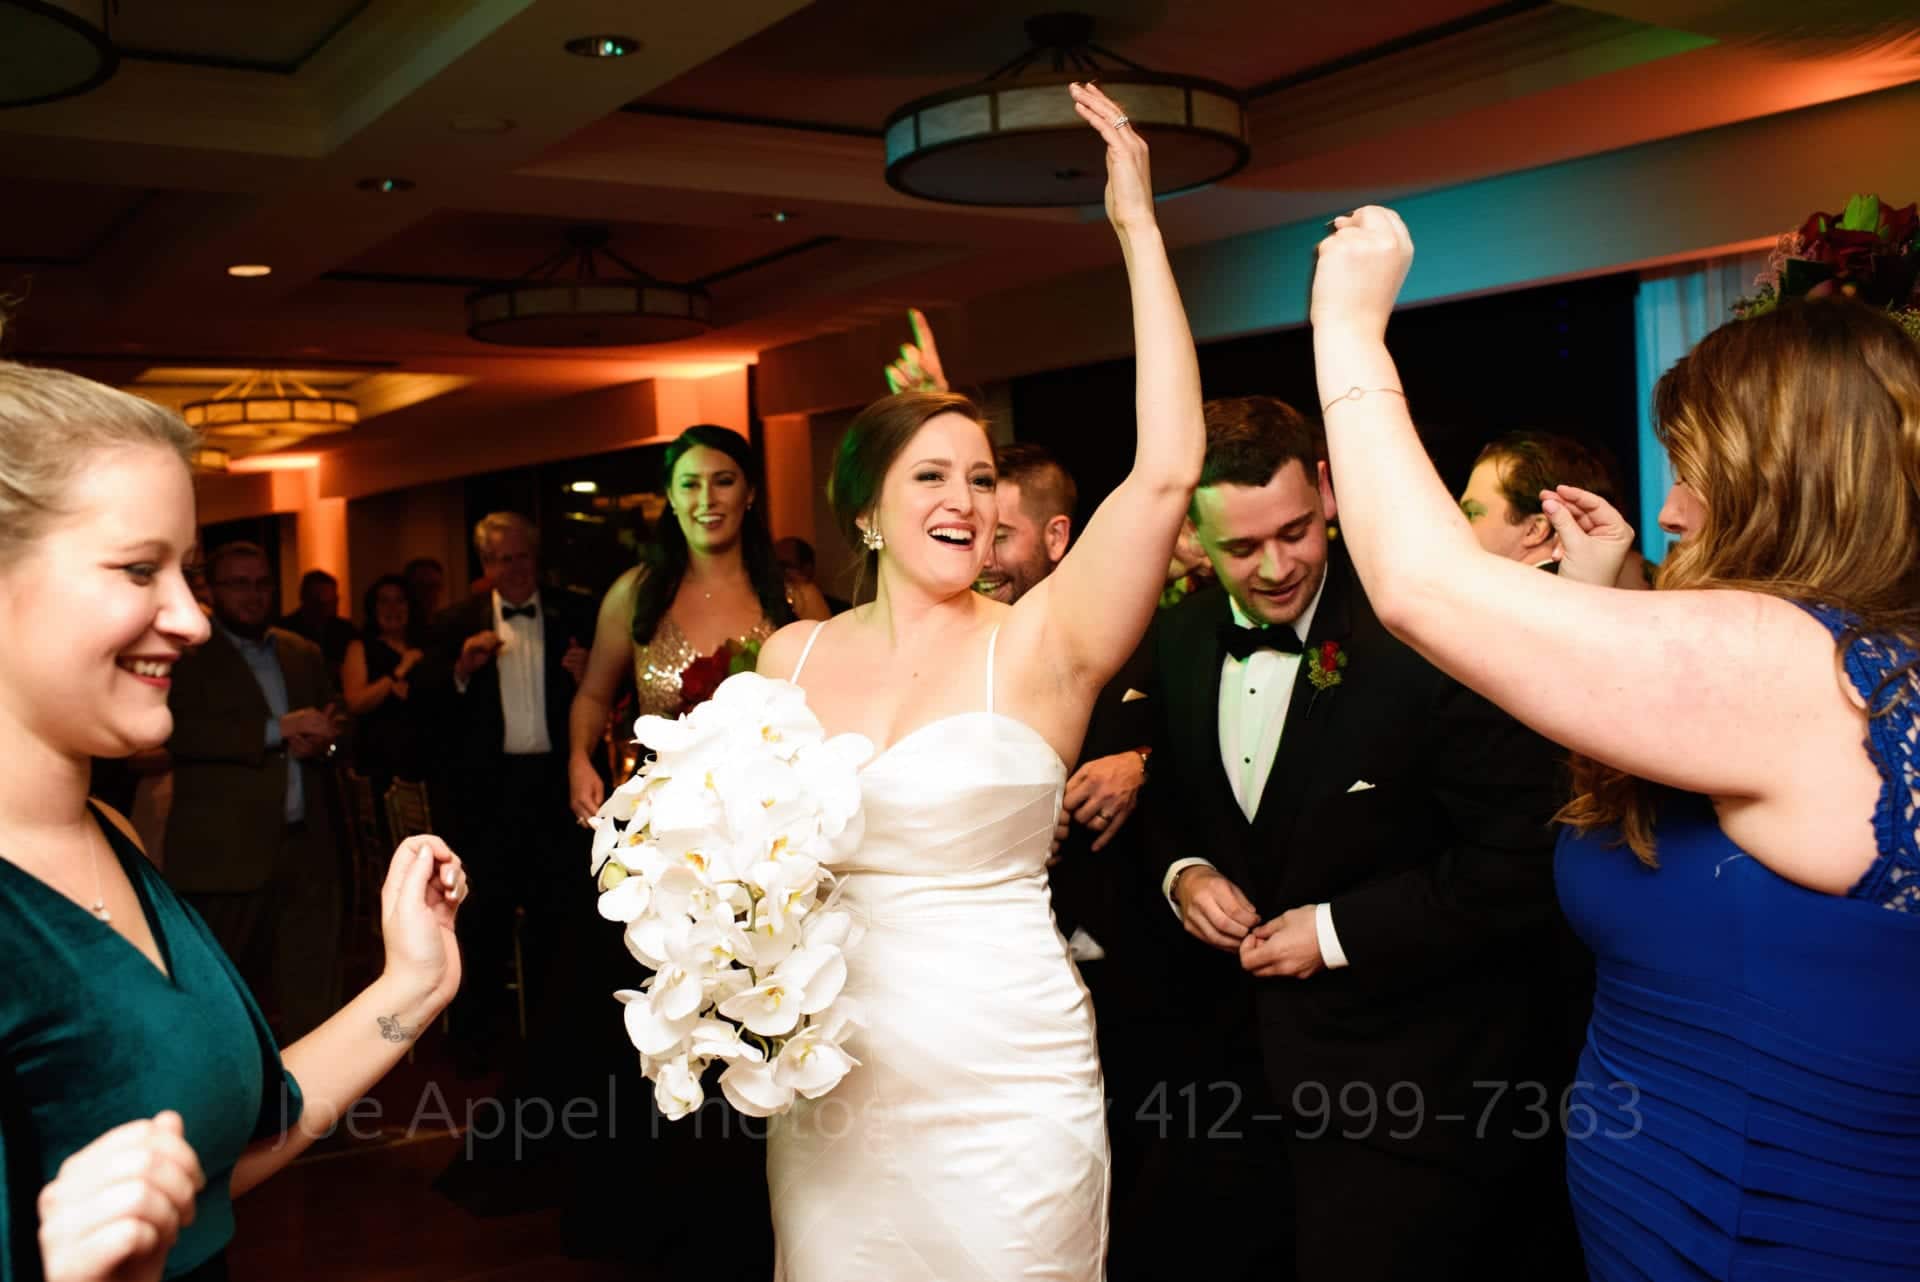 A bride holds her left arm into the air and smiles as she walks through a crowd of guests at her wedding.